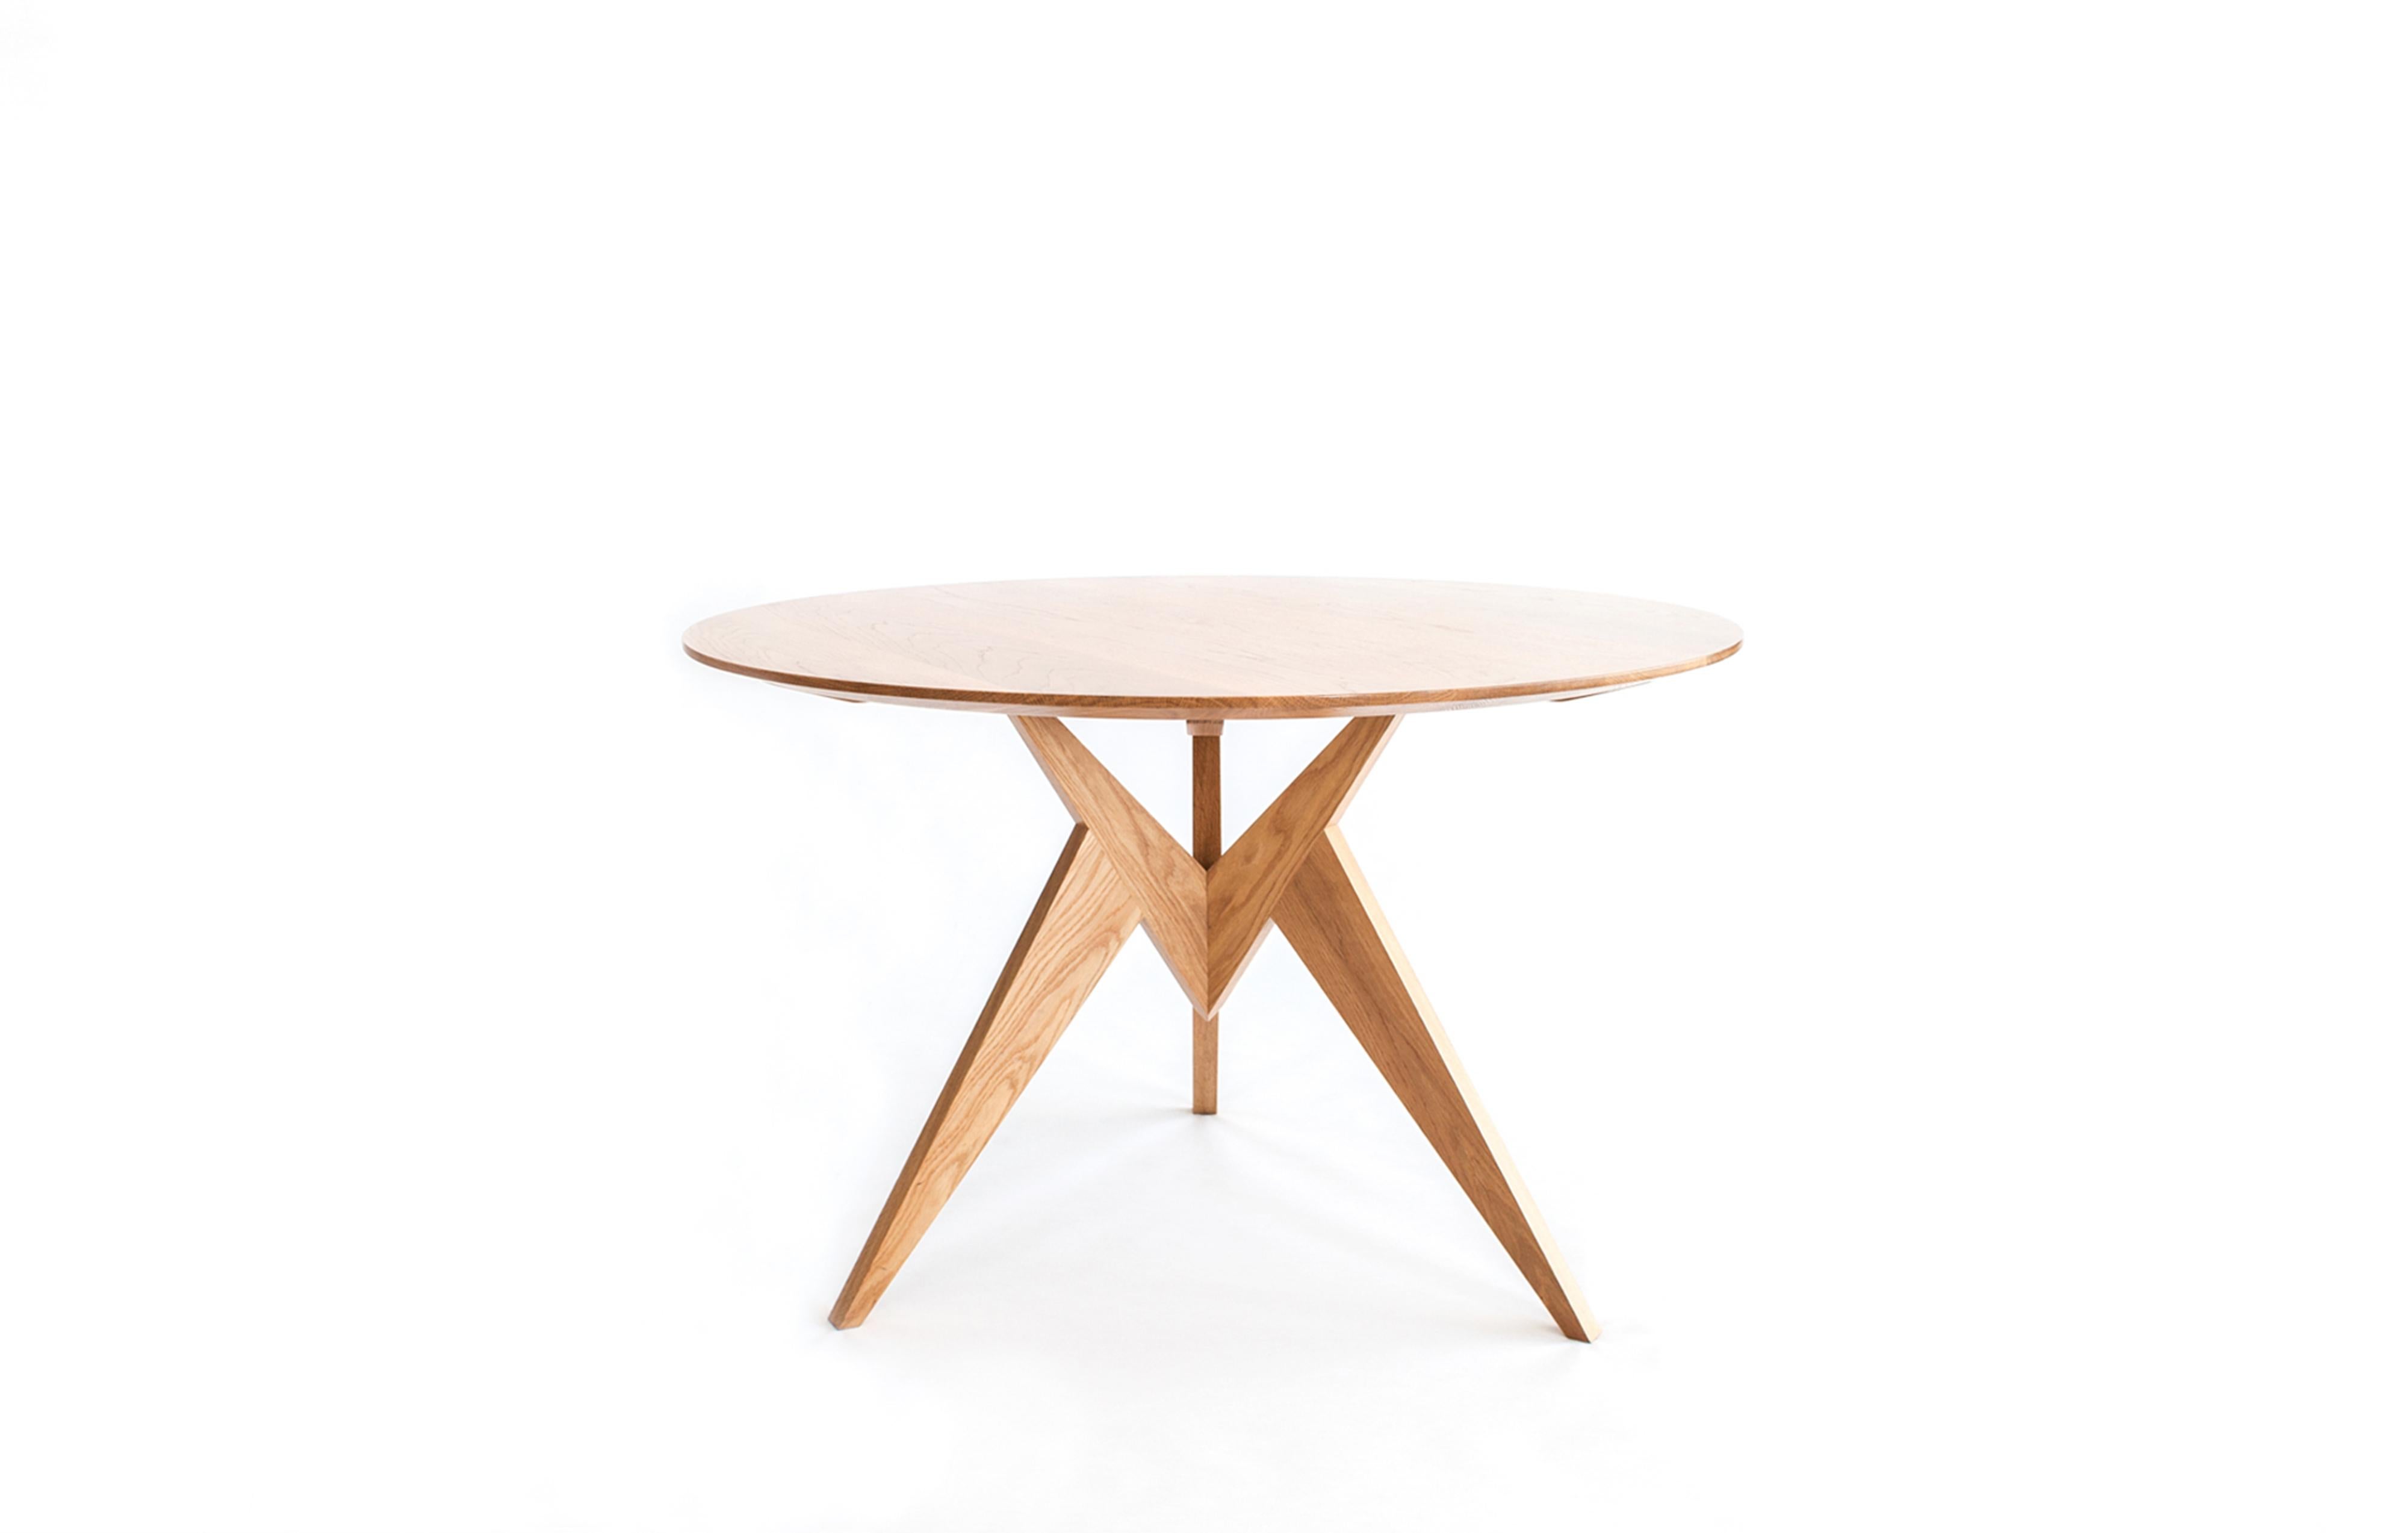 Oak Vieni dining table by Rosanna Ceravolo
Dimensions: W 120 x D 120 x H 75 cm
Materials: 30mm solid american oak, polyurethane spray finish.
Also available in different dimensions and materials.

Inspired by Italian modernist design of the